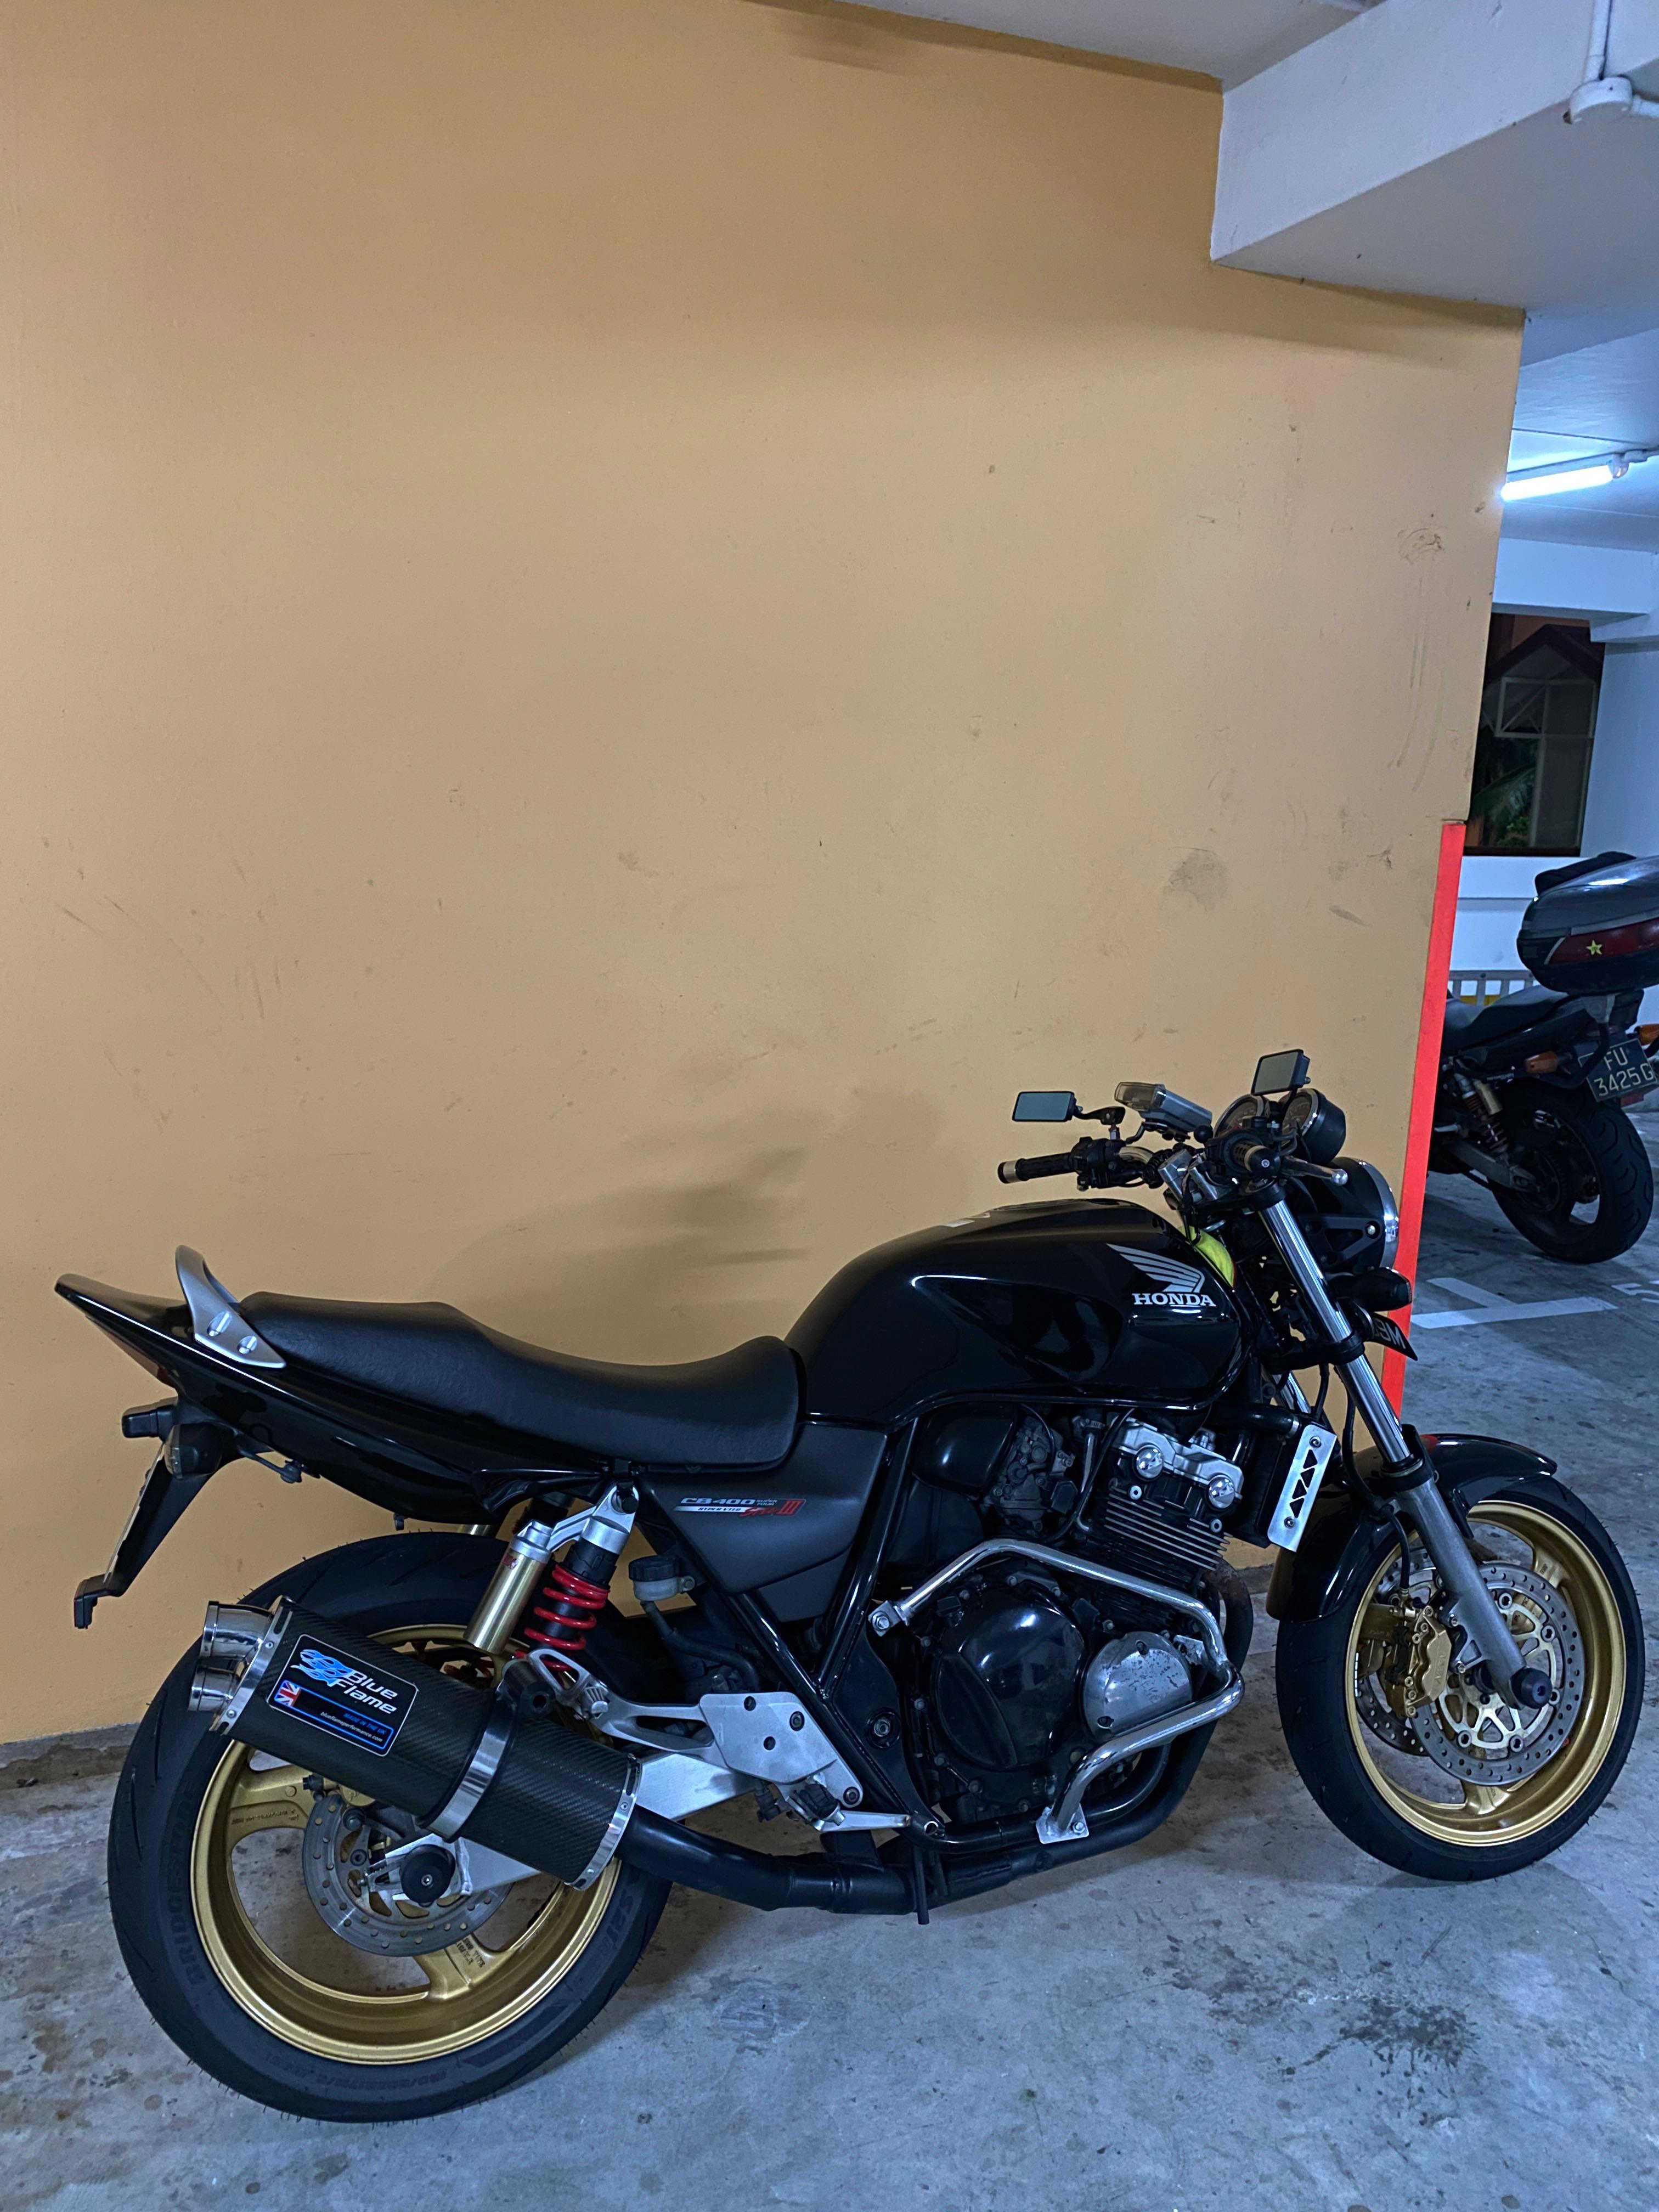 Honda Cb400 Super 4 Spec 3 Motorcycles Motorcycles For Sale Class 2a On Carousell